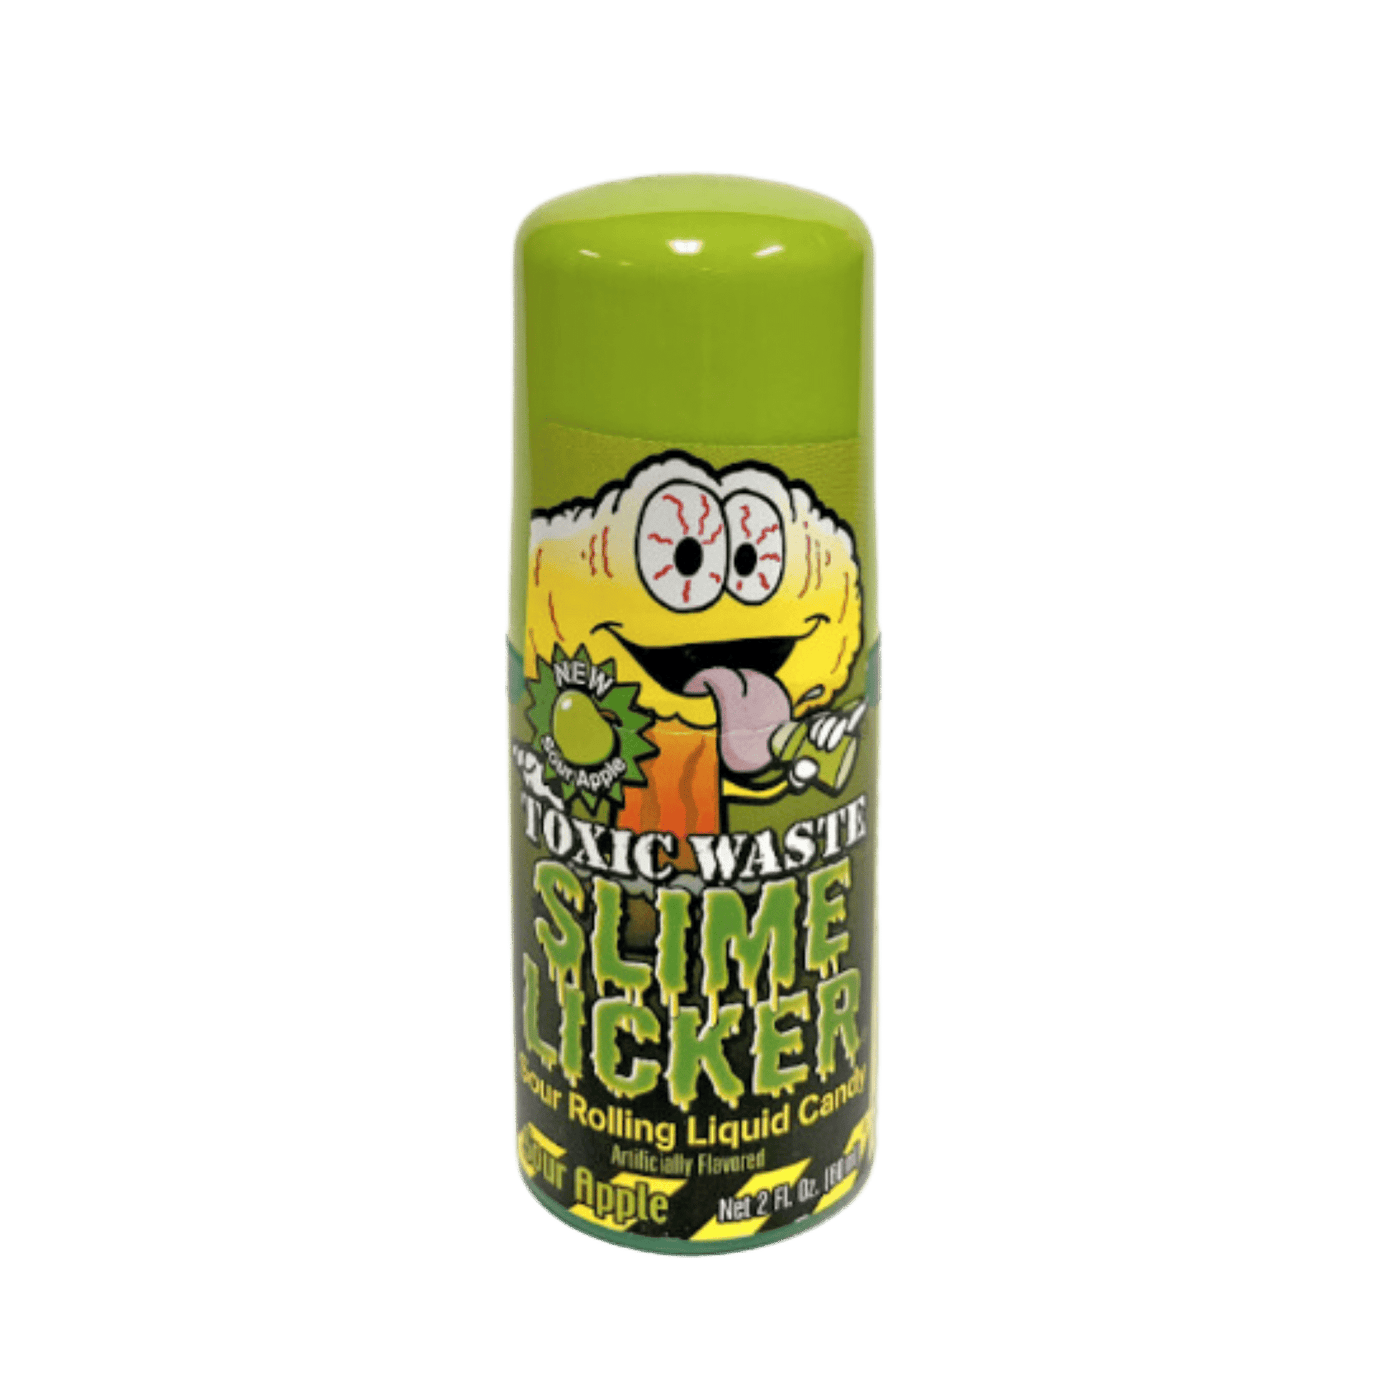 Toxic Waste - Slime Licker